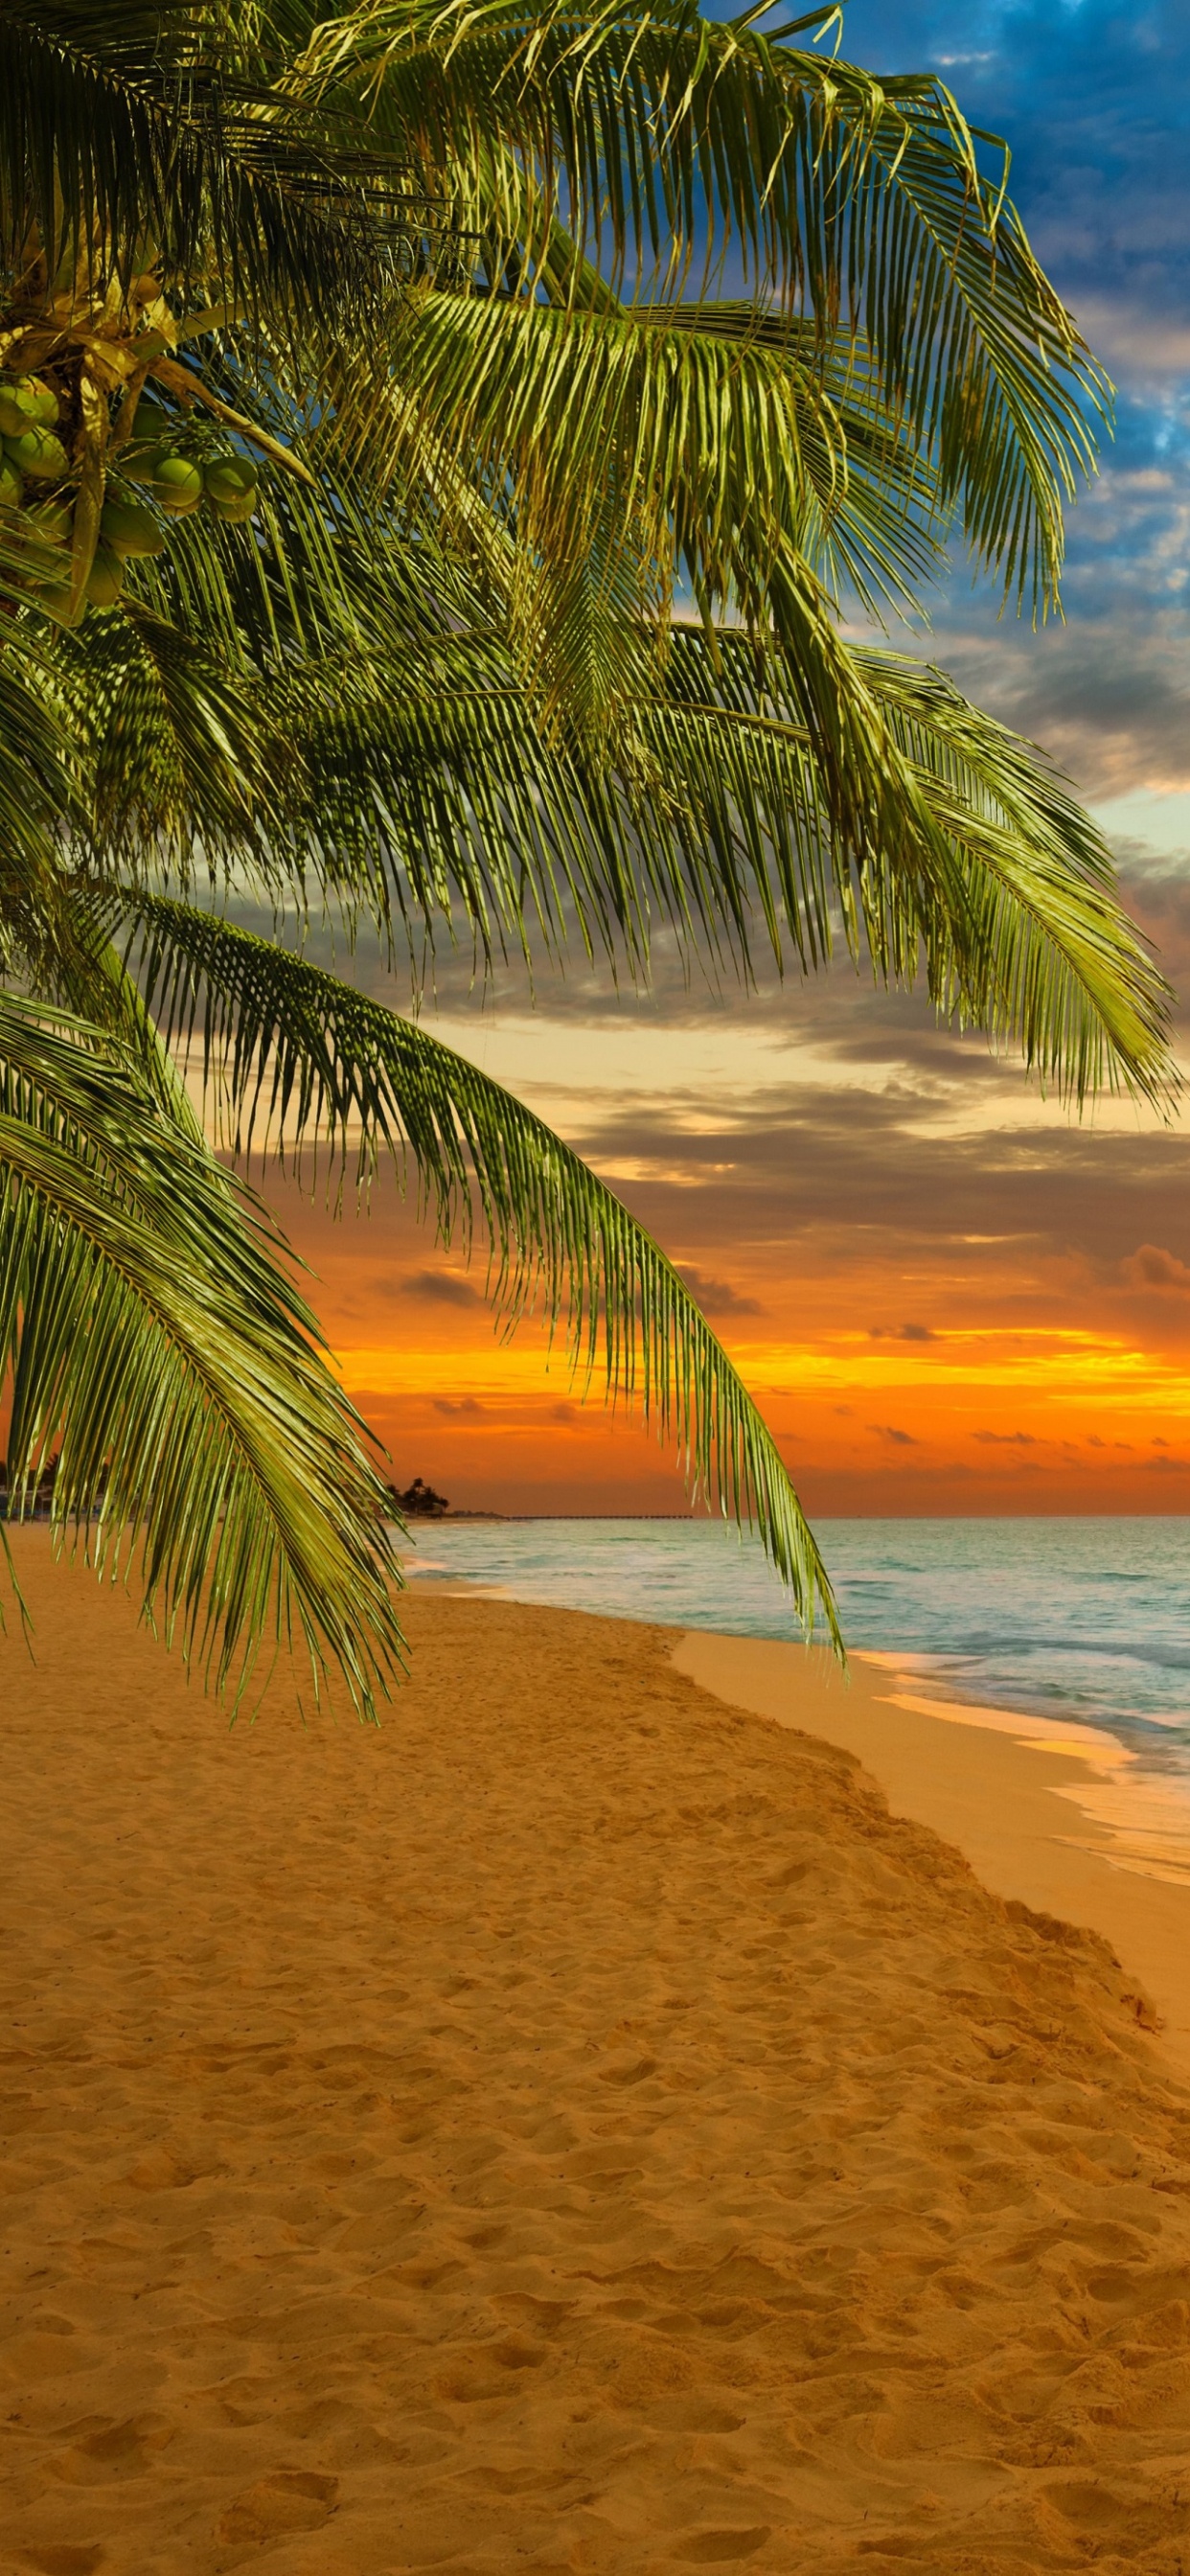 Palm Tree on Beach Shore During Sunset. Wallpaper in 1242x2688 Resolution